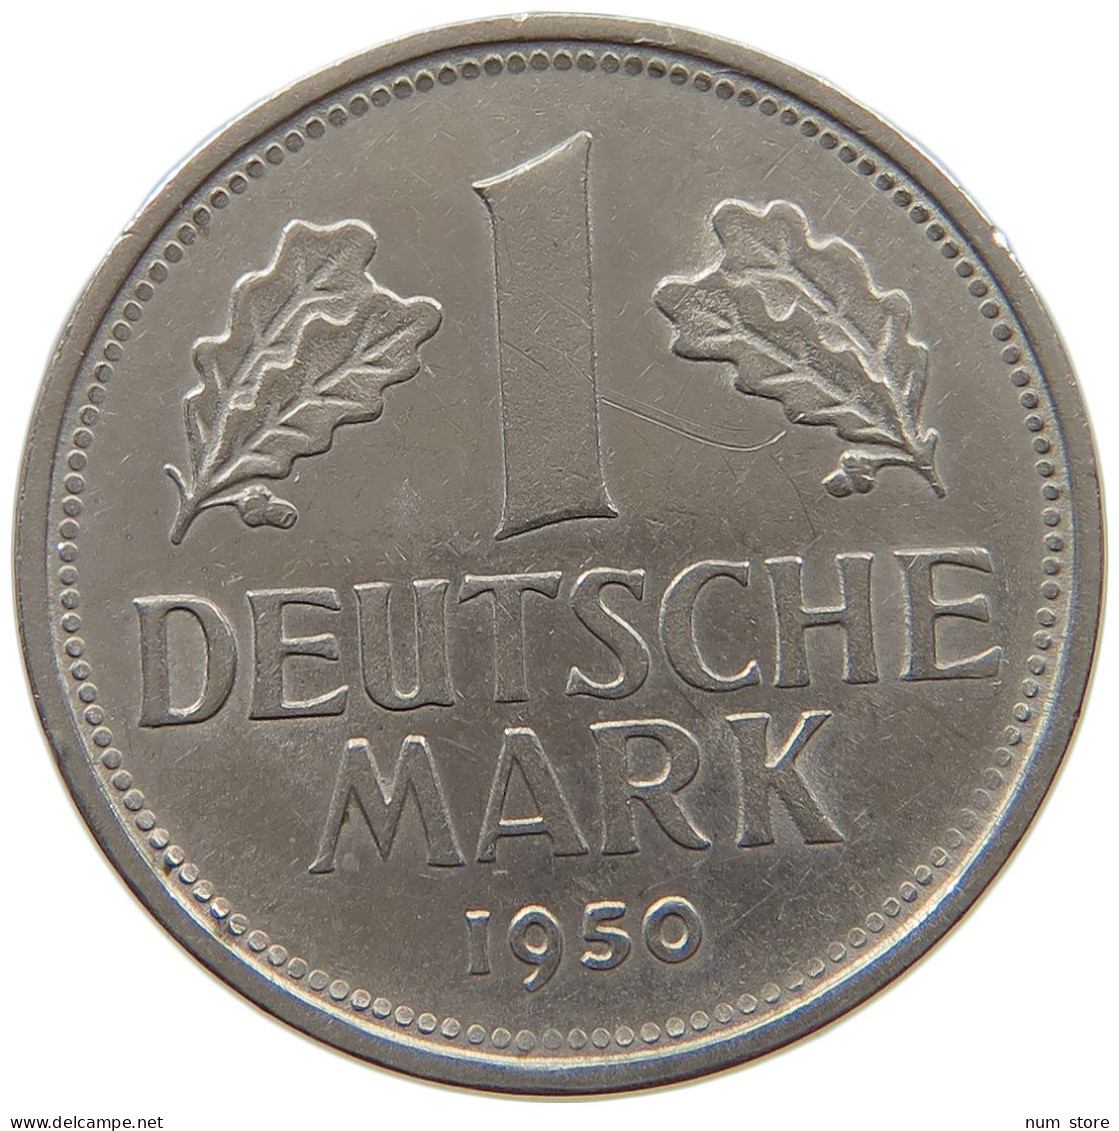 GERMANY WEST 1 MARK 1950 G #a072 0241 - 1 Marco